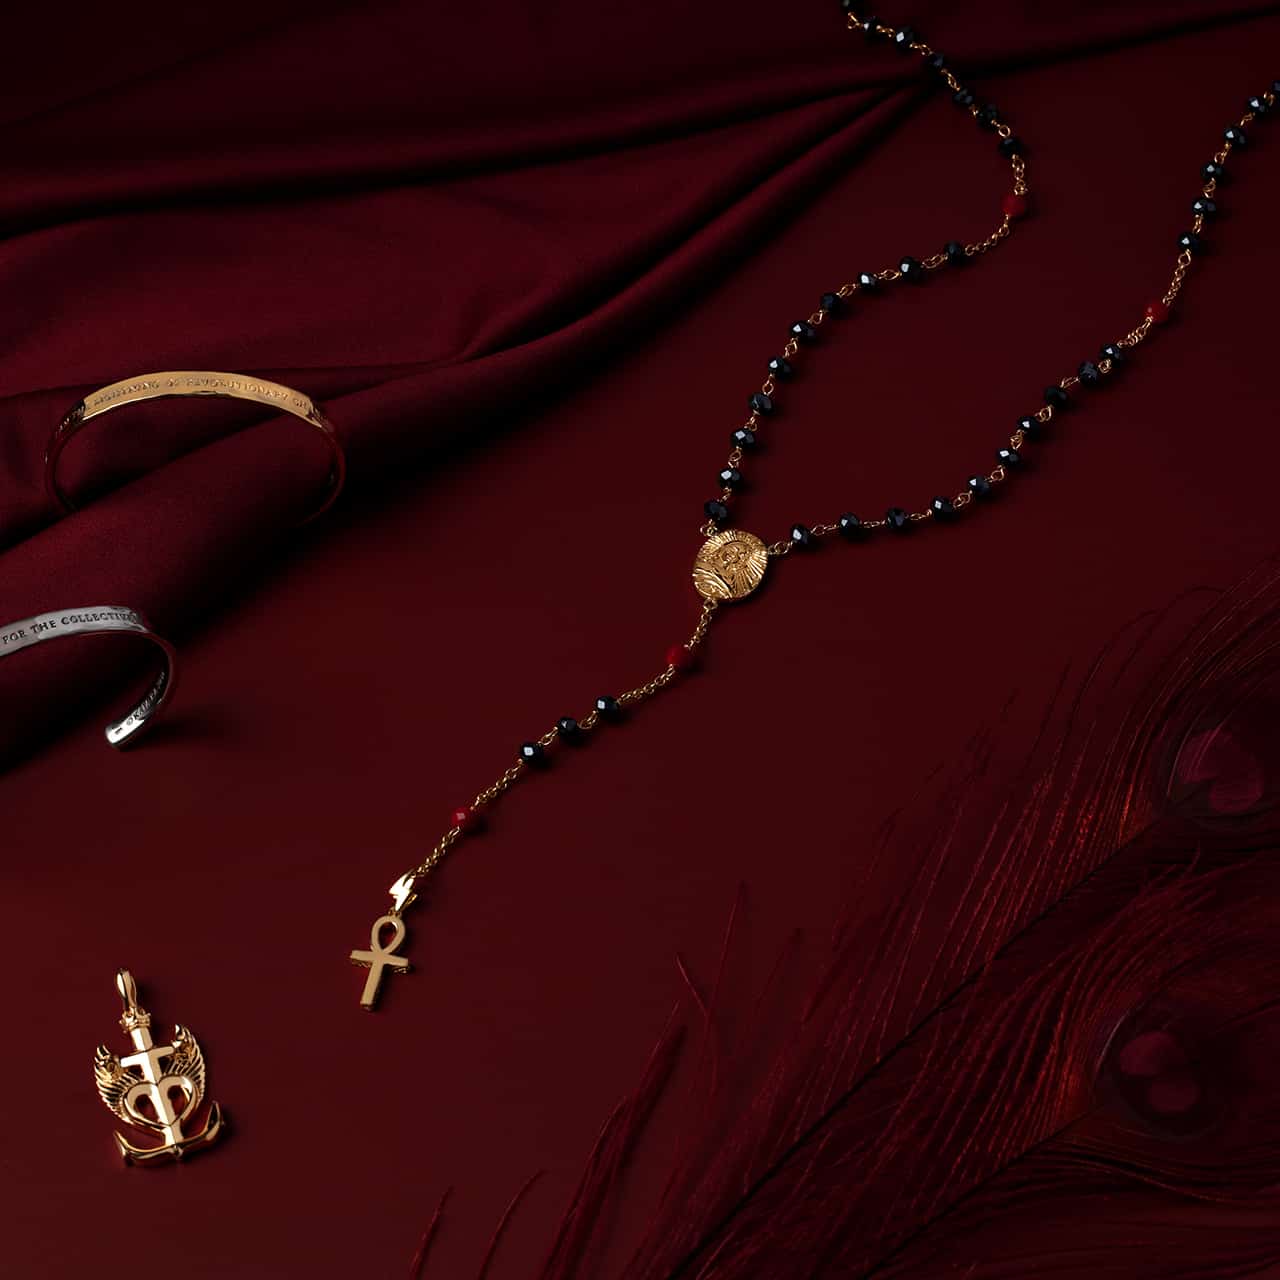 mary magdalene jewelry on red silk